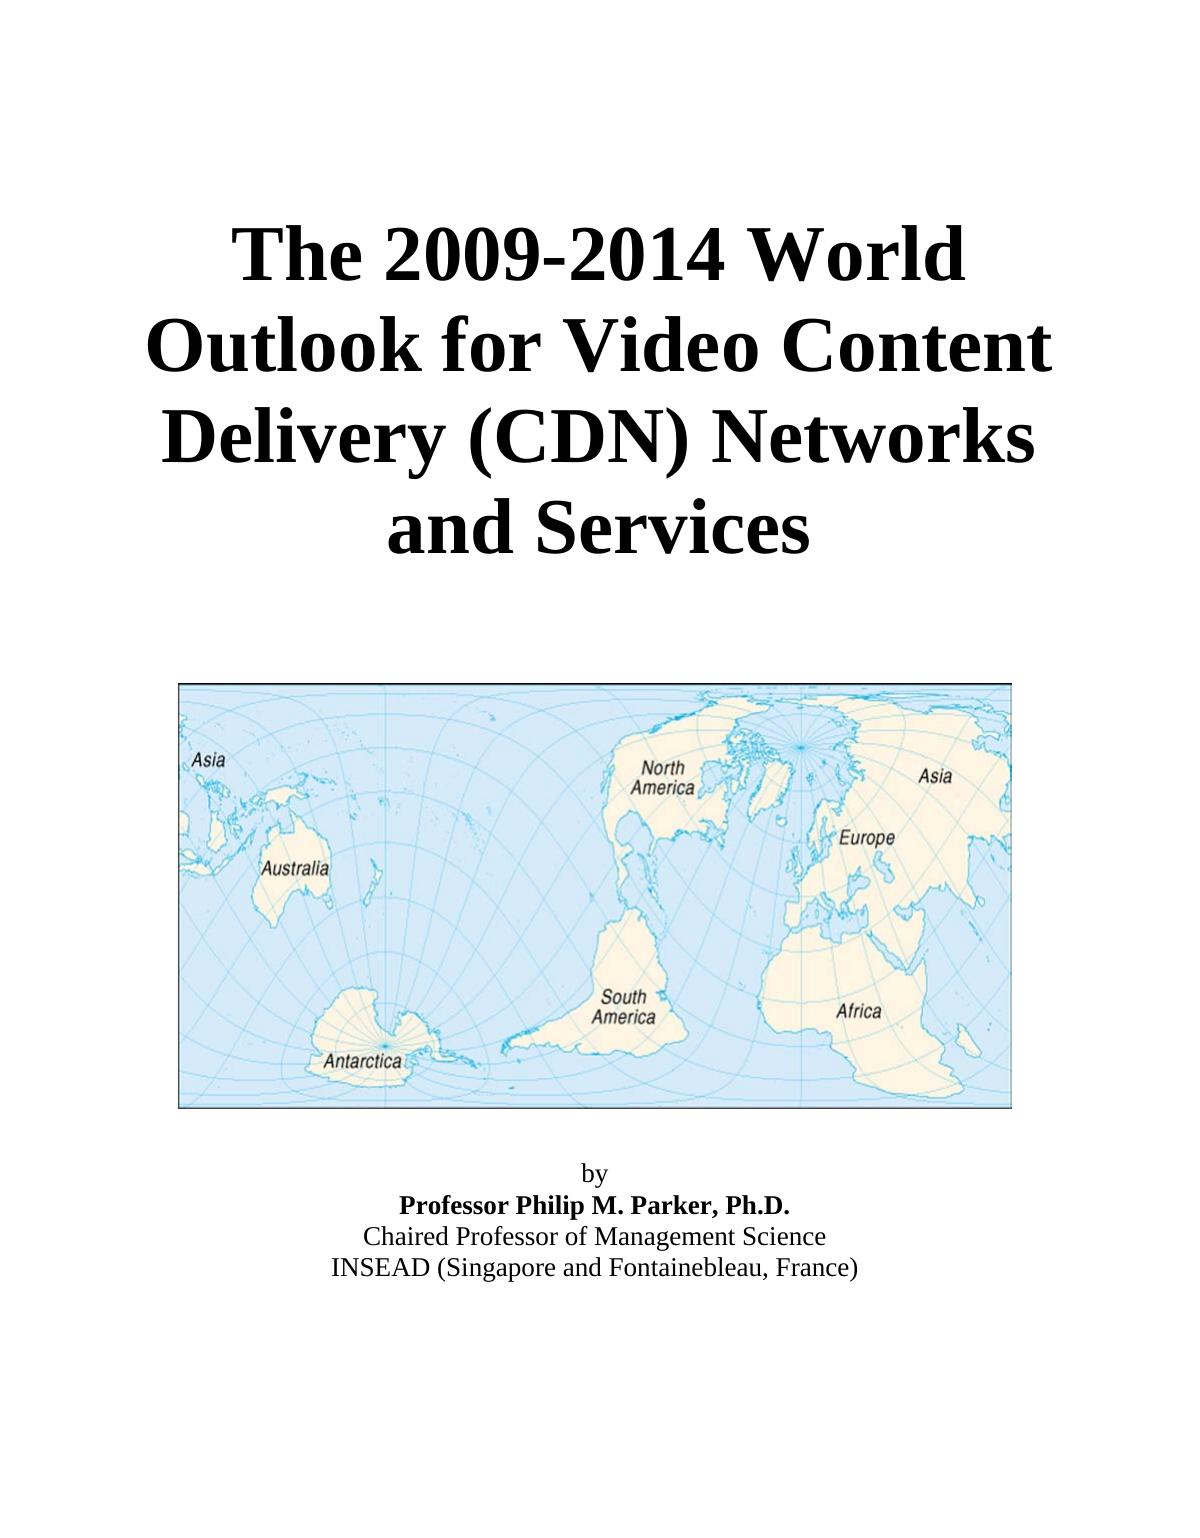 The 2009-2014 World Outlook for Video Content Delivery (CDN) Networks and Services